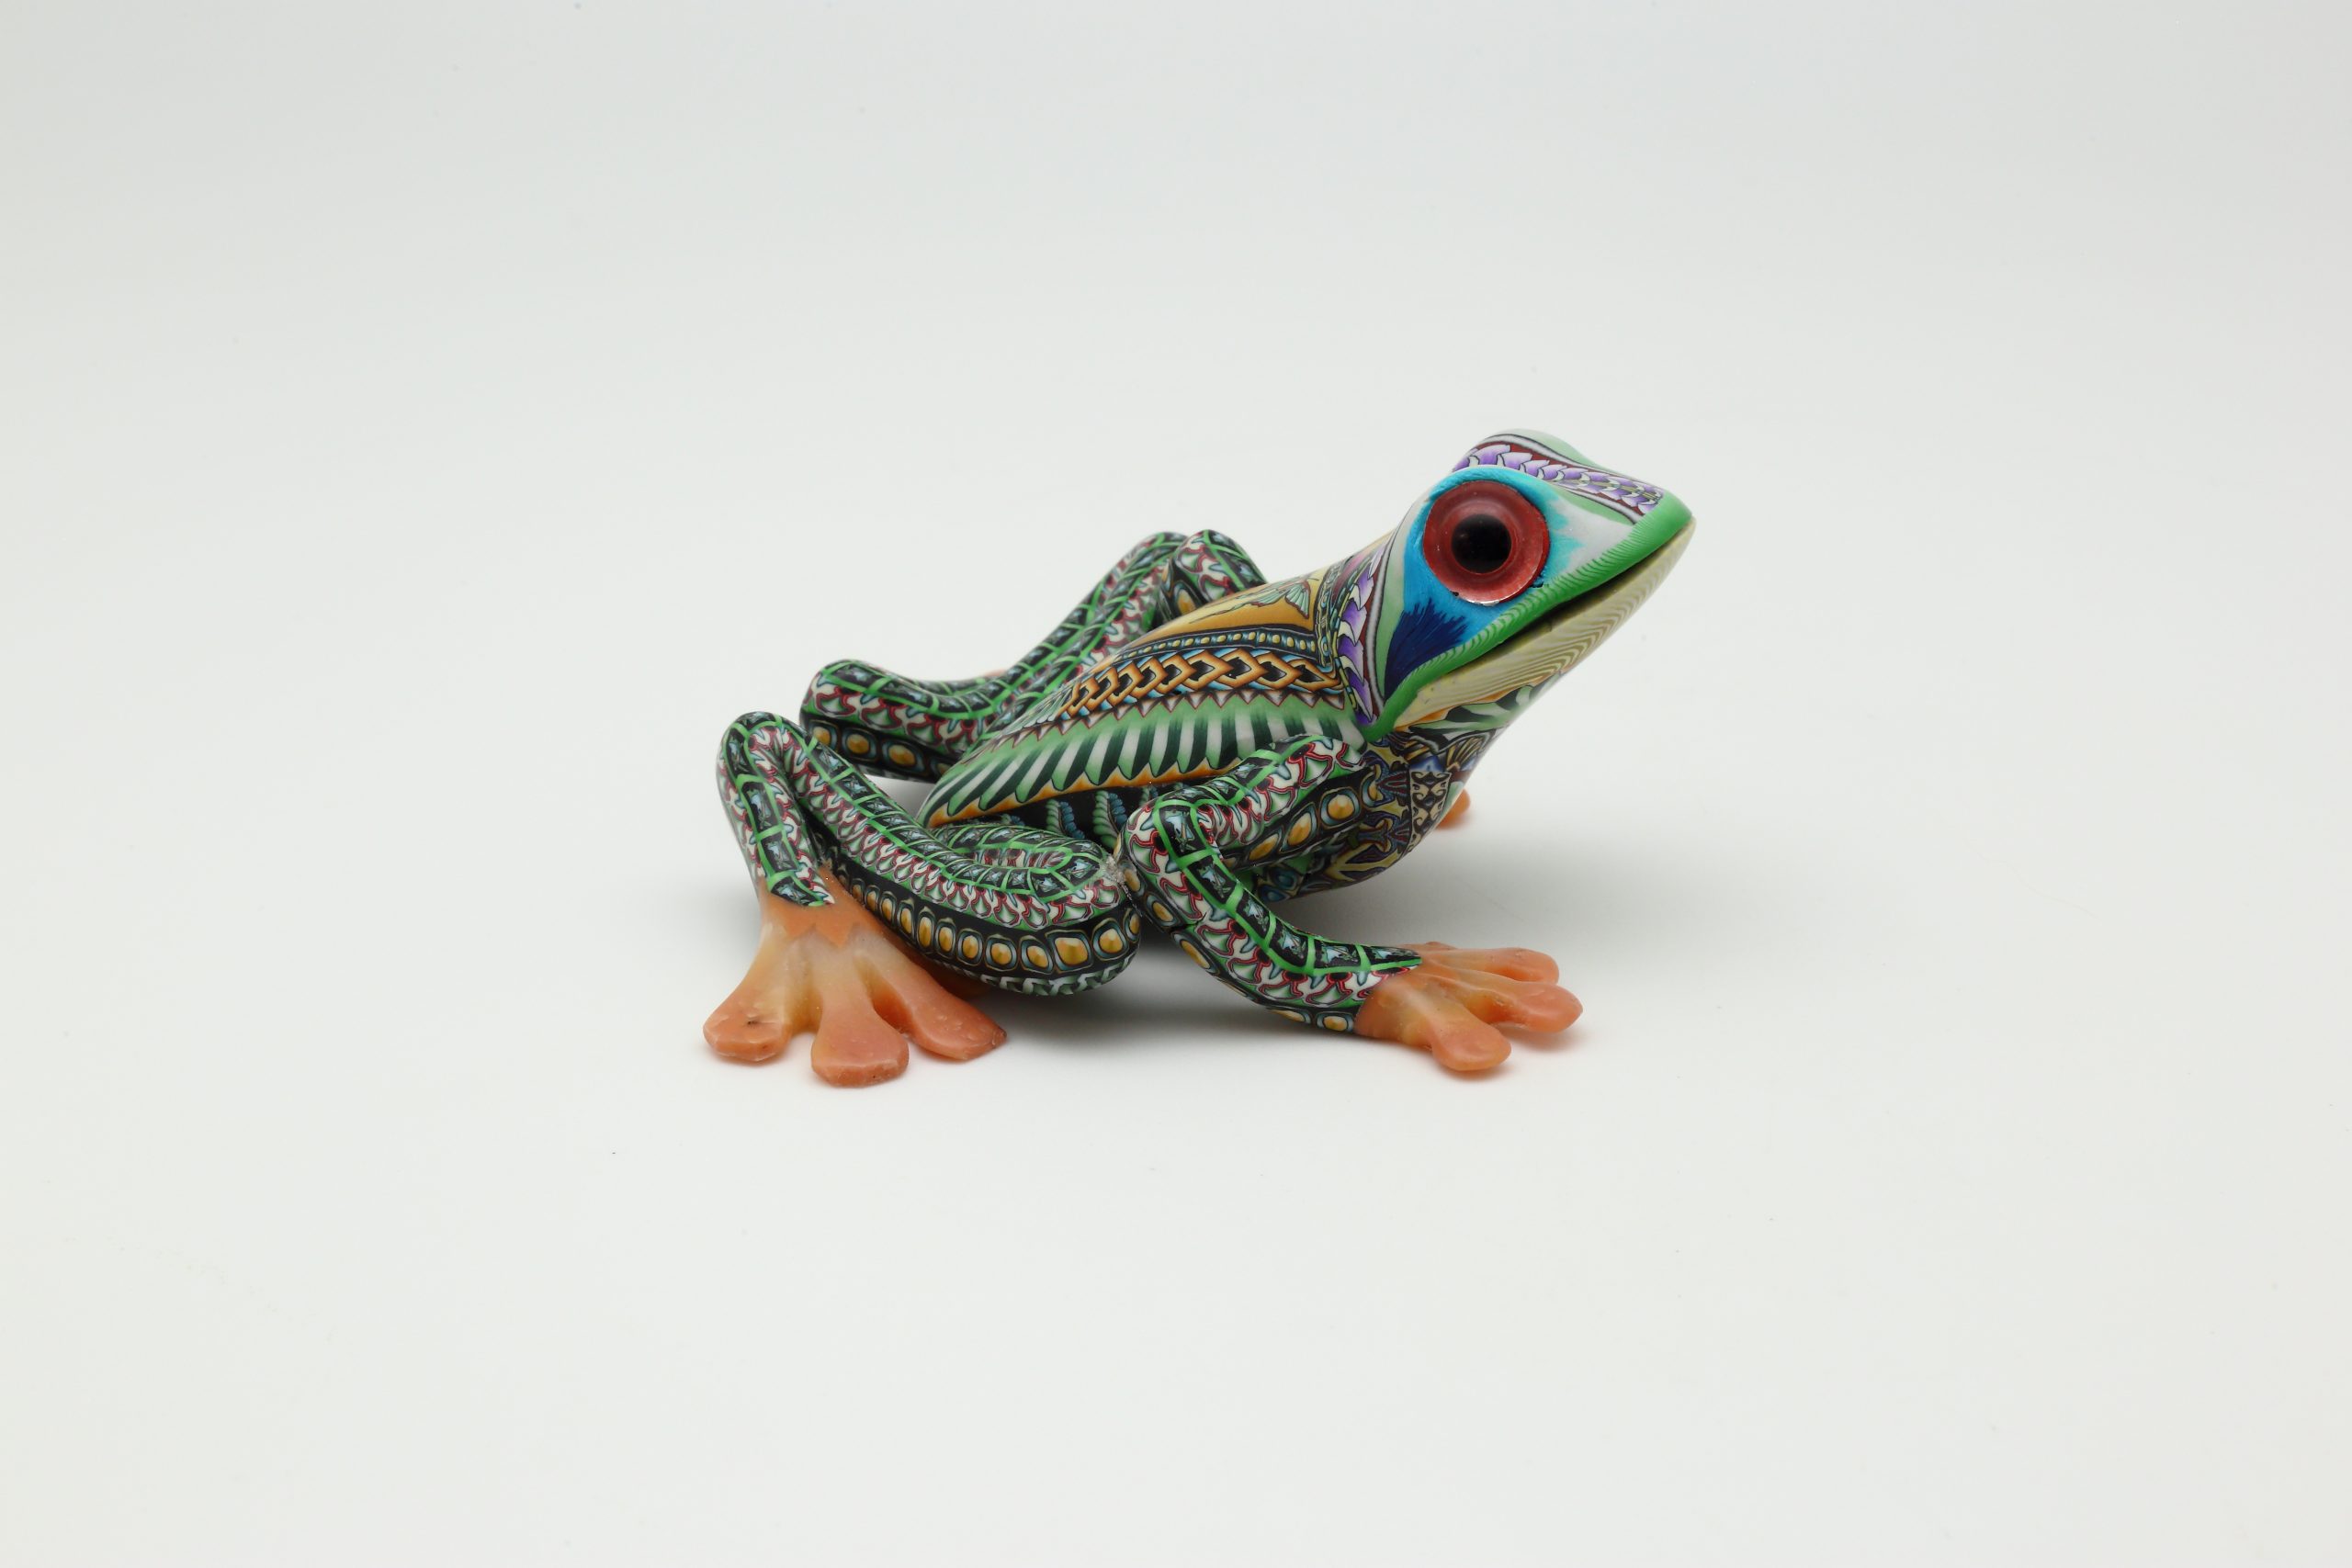 ZPAQI 10g Frog Polymer Clay Slices Green Frog Fimo Slices